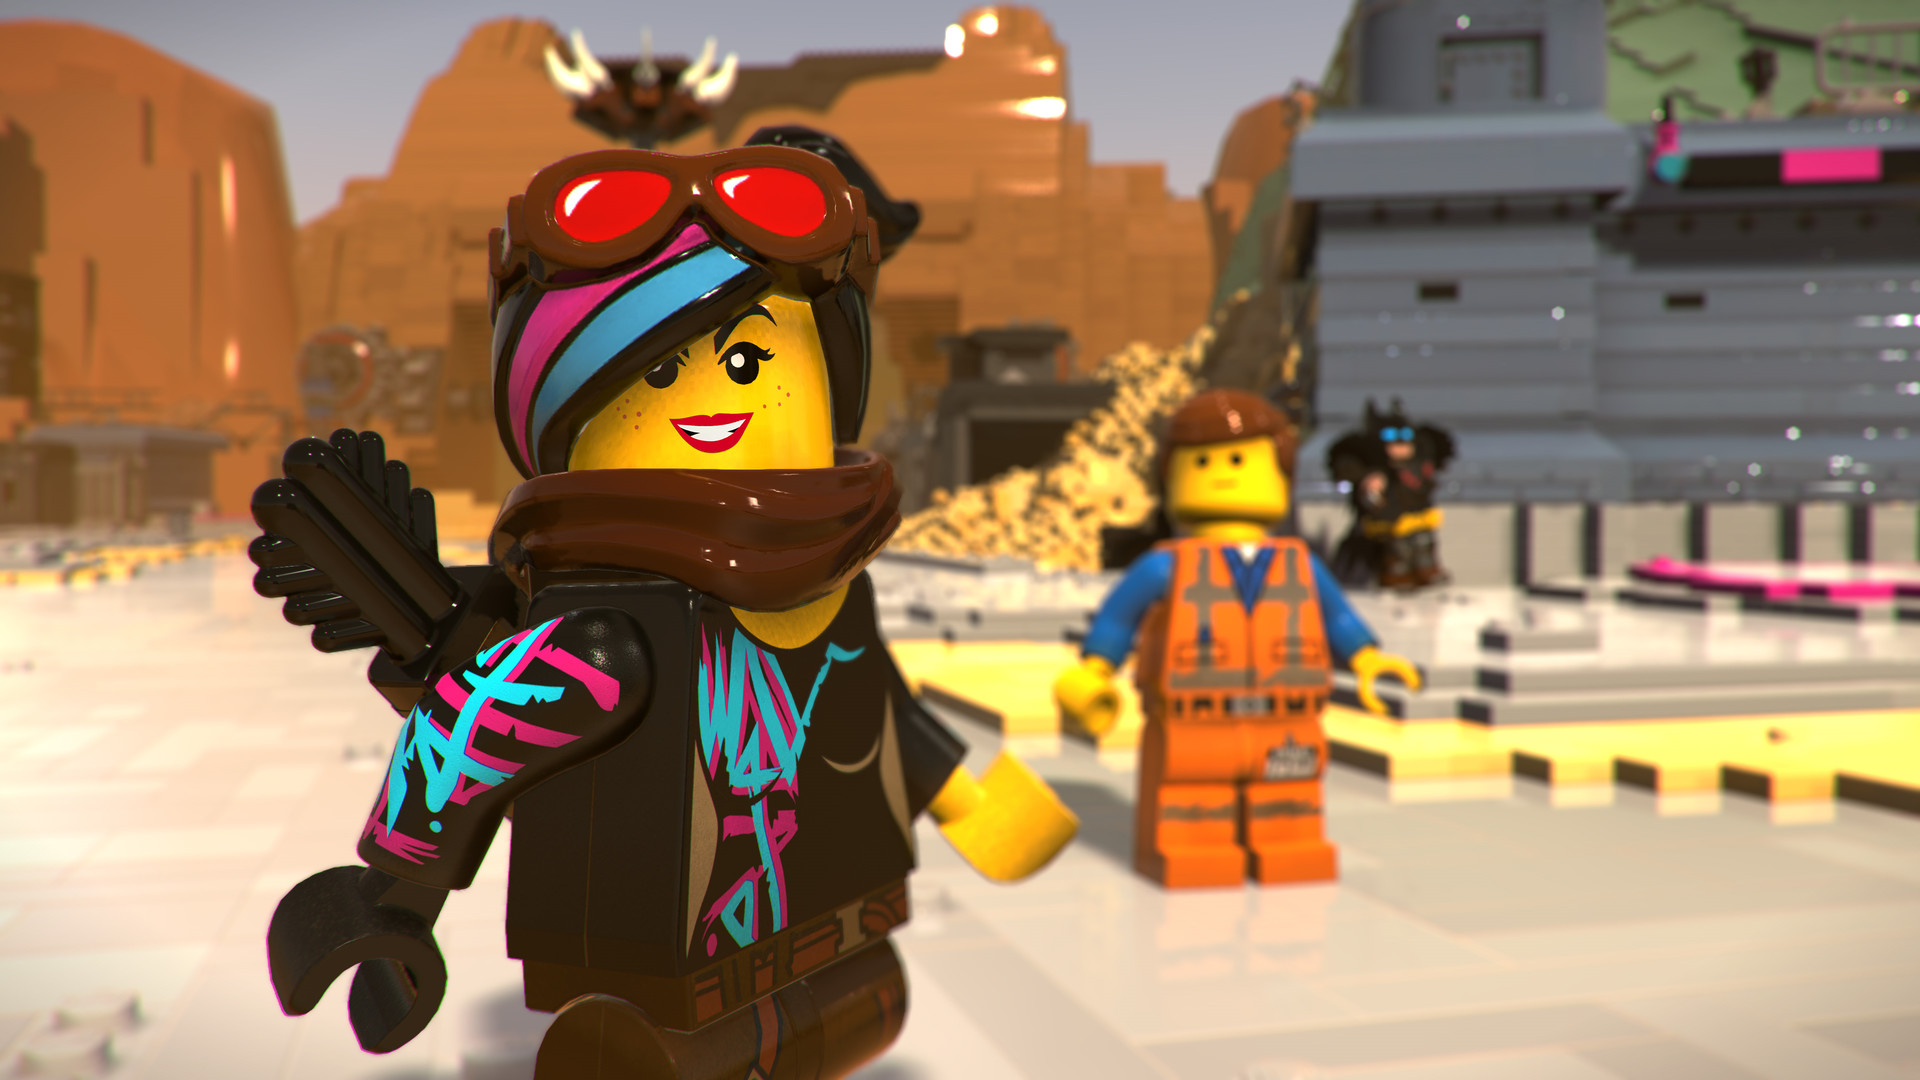 Save 80% on The LEGO Movie 2 Videogame on Steam